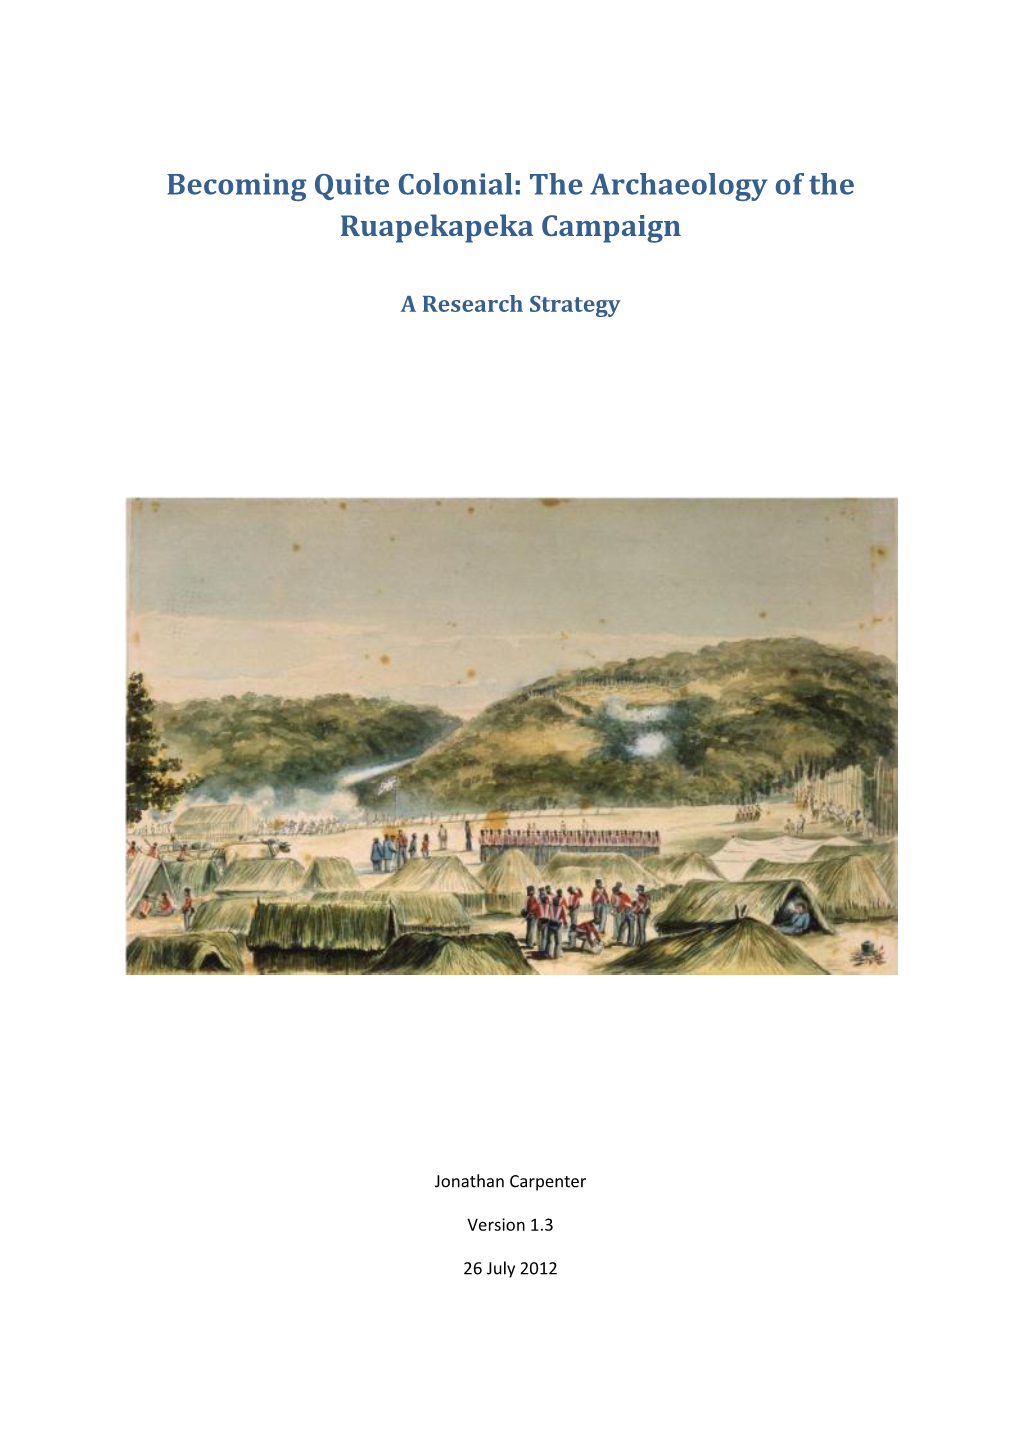 Becoming Quite Colonial: the Archaeology of the Ruapekapeka Campaign